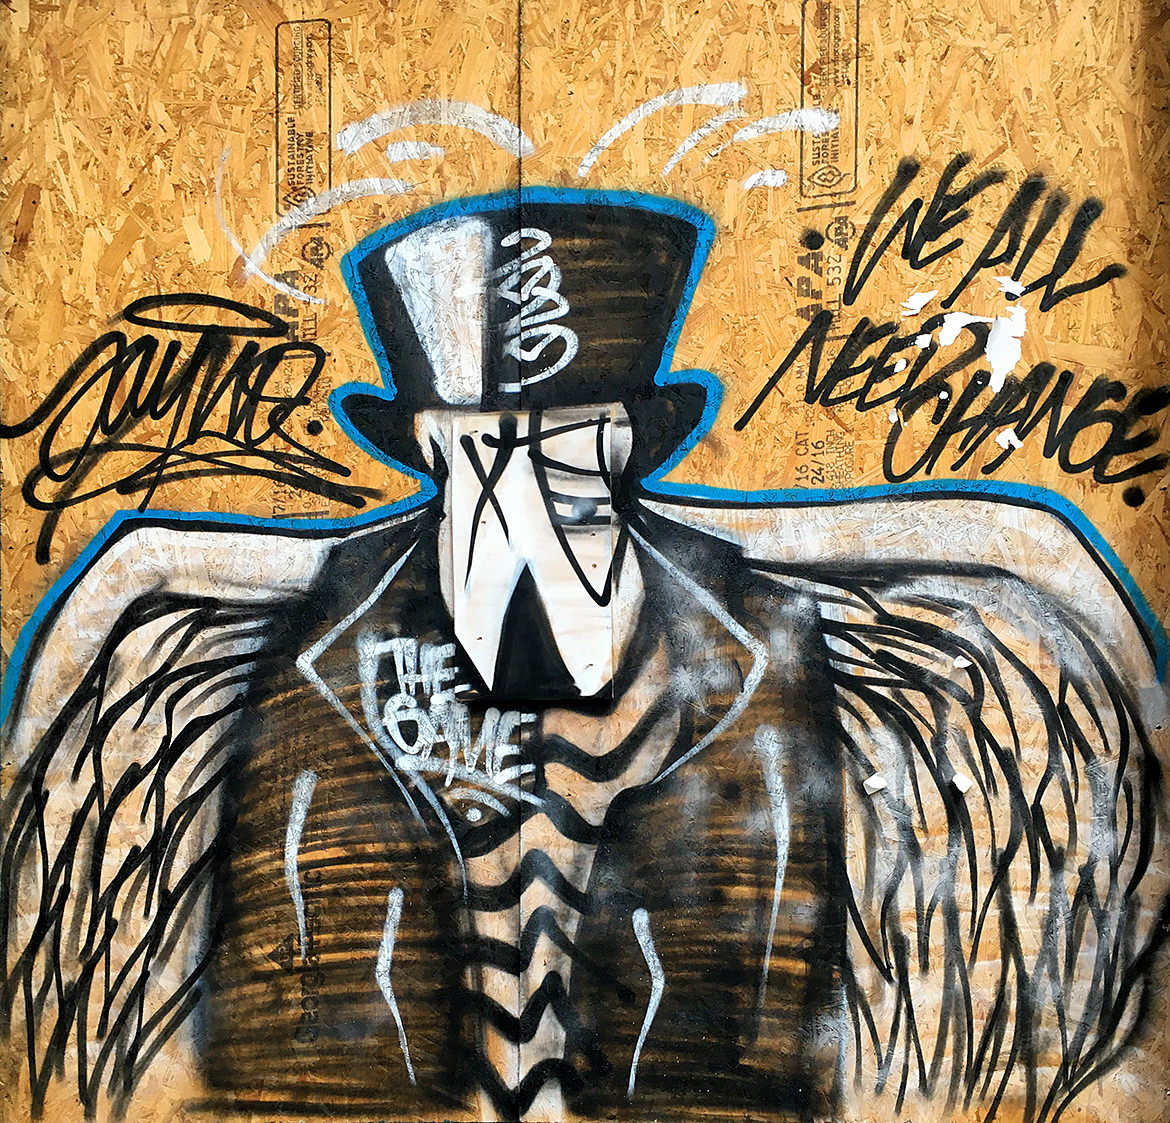 A spray paint cartoon bird wearing a black suit jacket, top hat and striped shirt with large white wings along with the phrase, "we all need change."